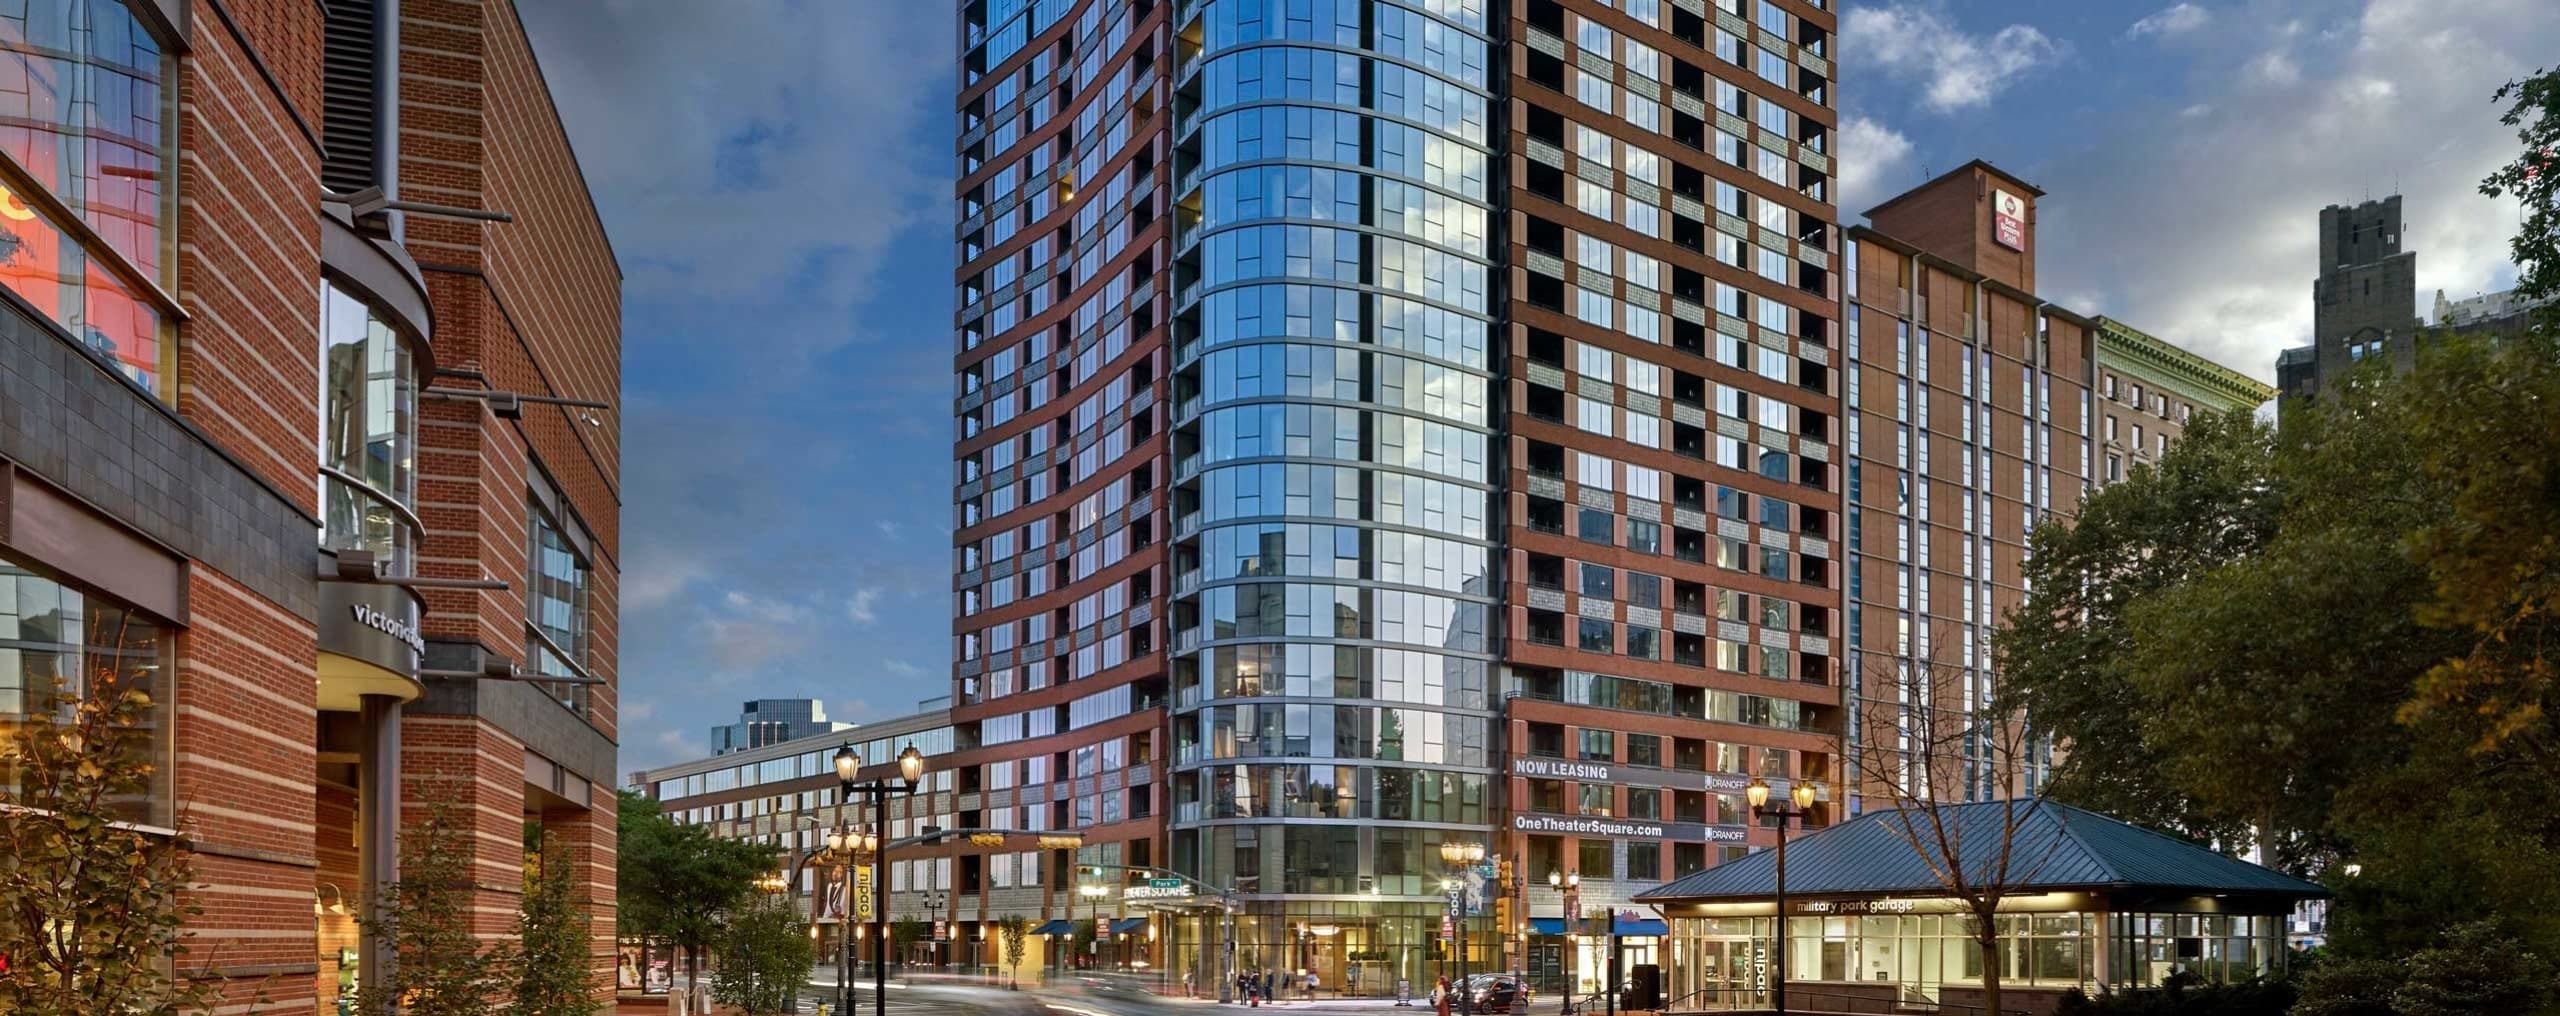 One Theater Square Luxury Apartments in Newark, NJ